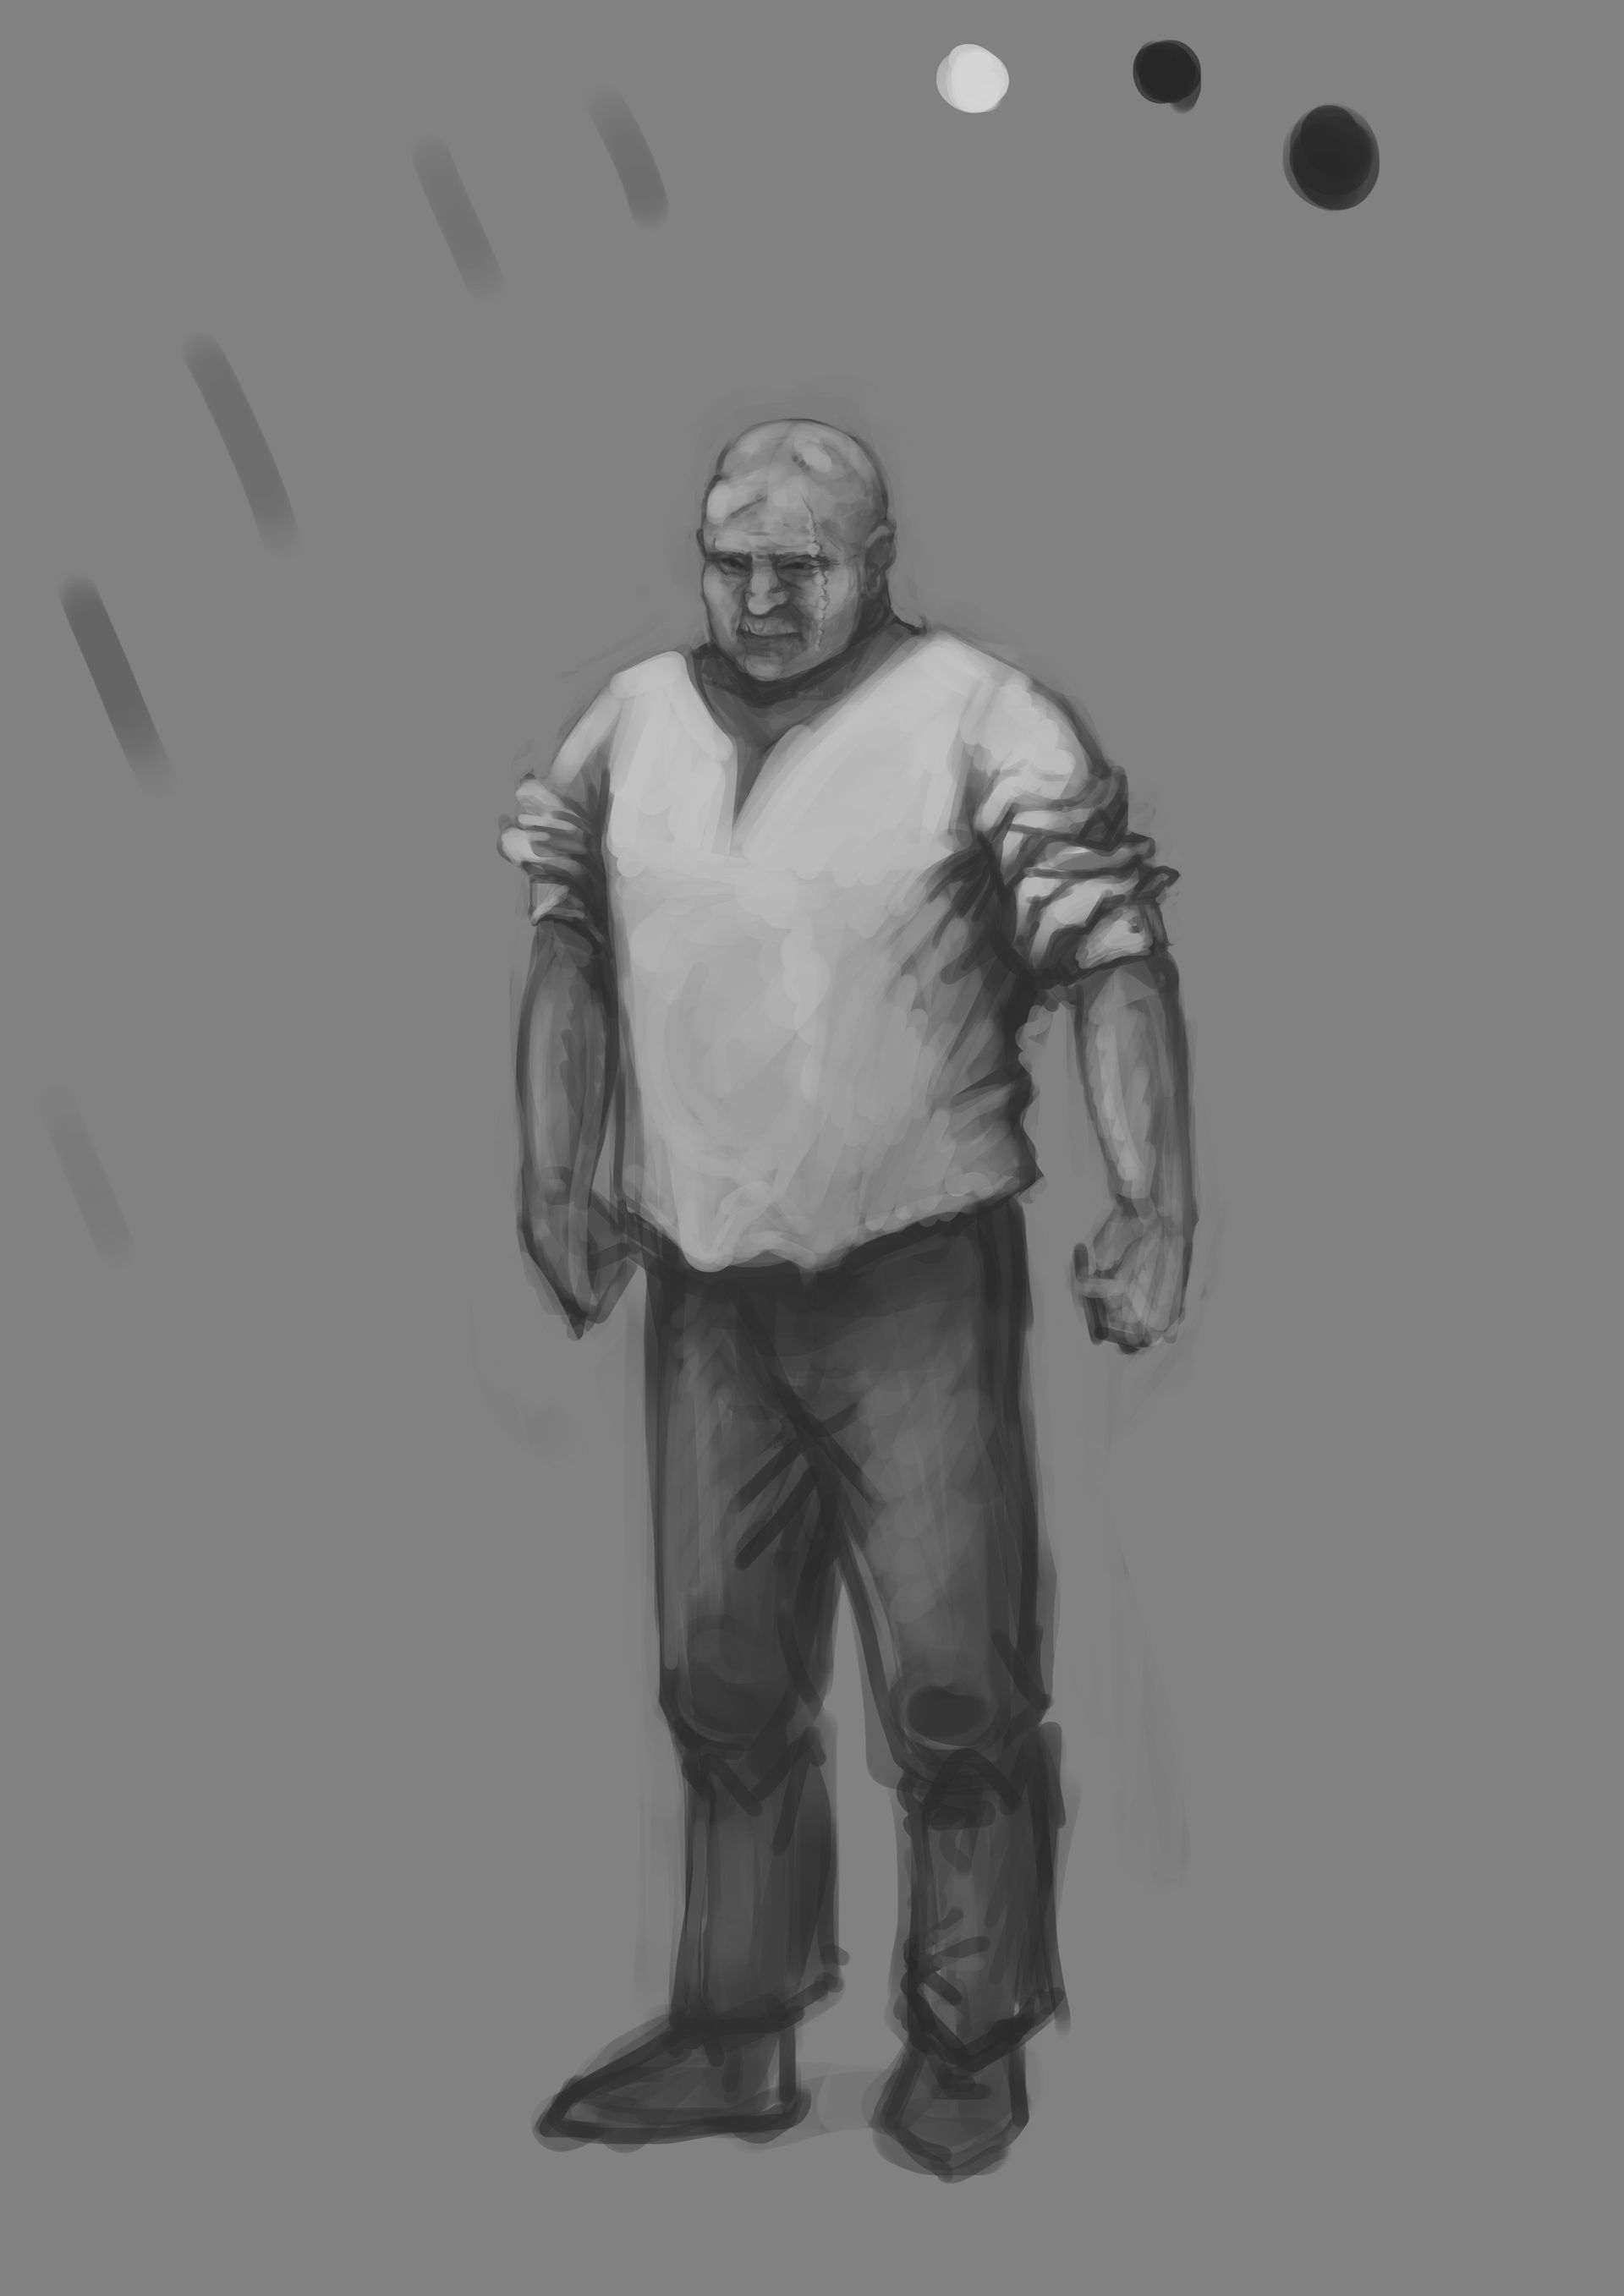 Grayscale digital sketch of a large scarred man.